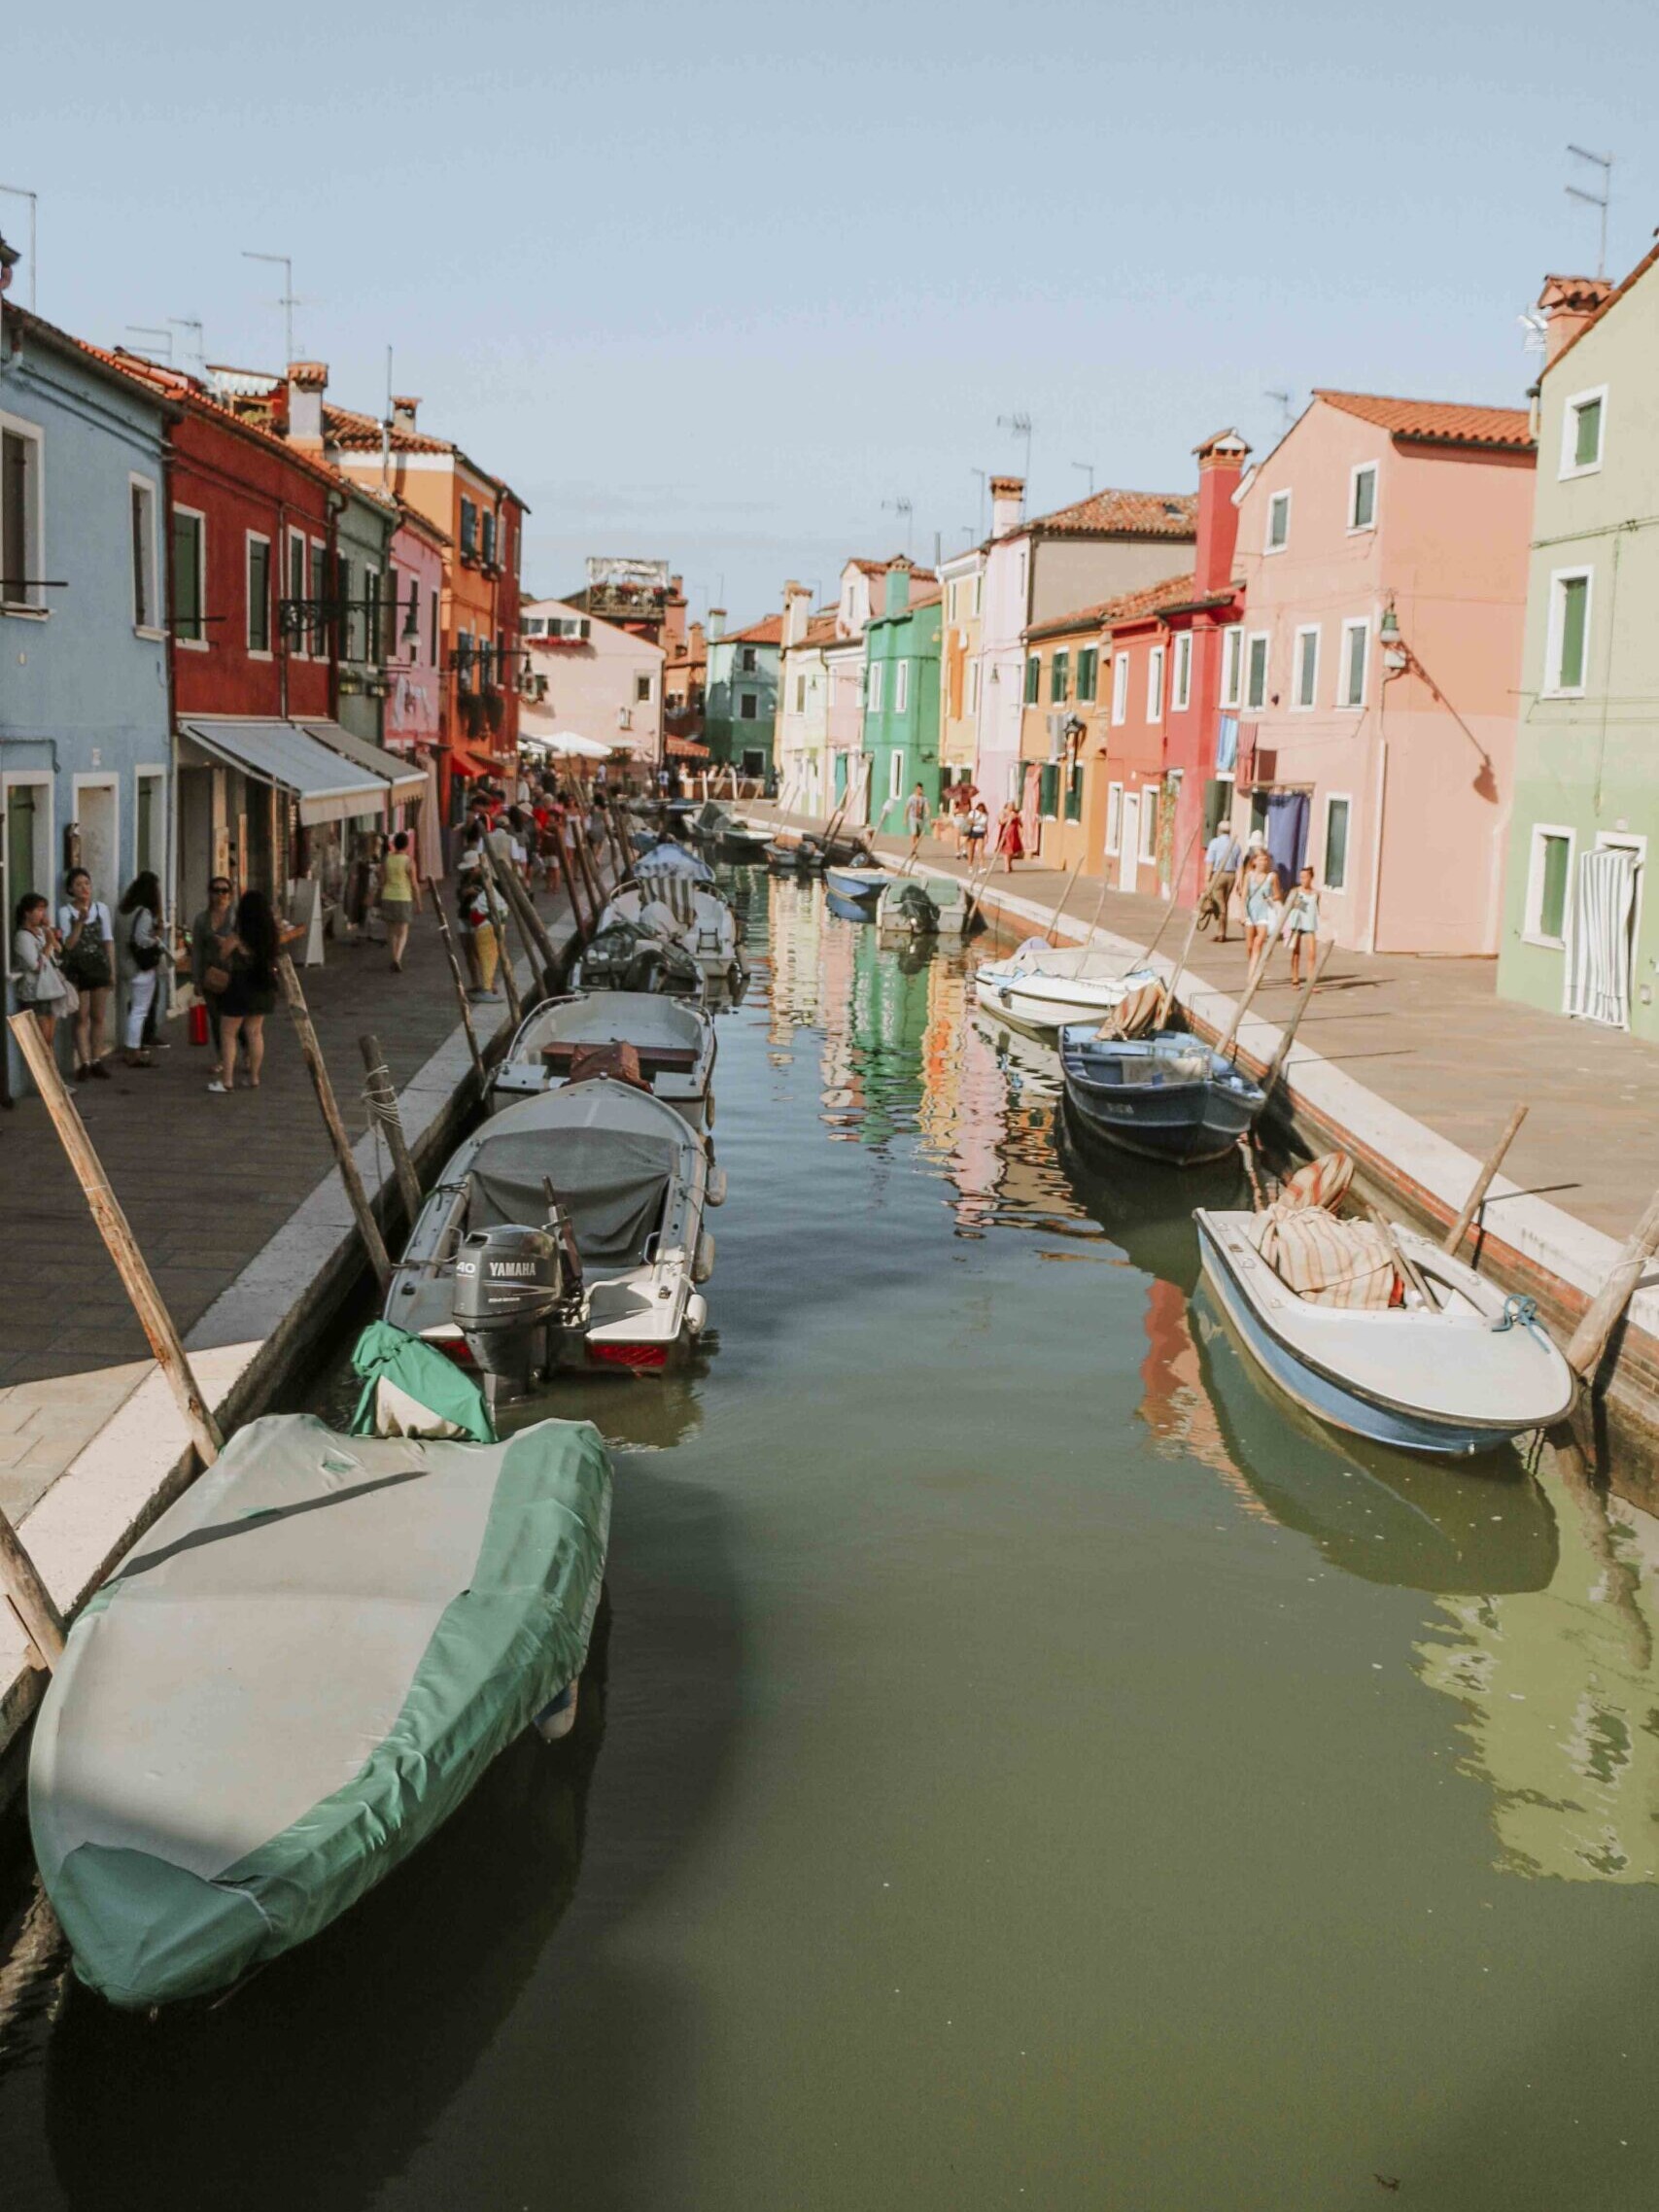 Italy in summer burano island with colorful boats